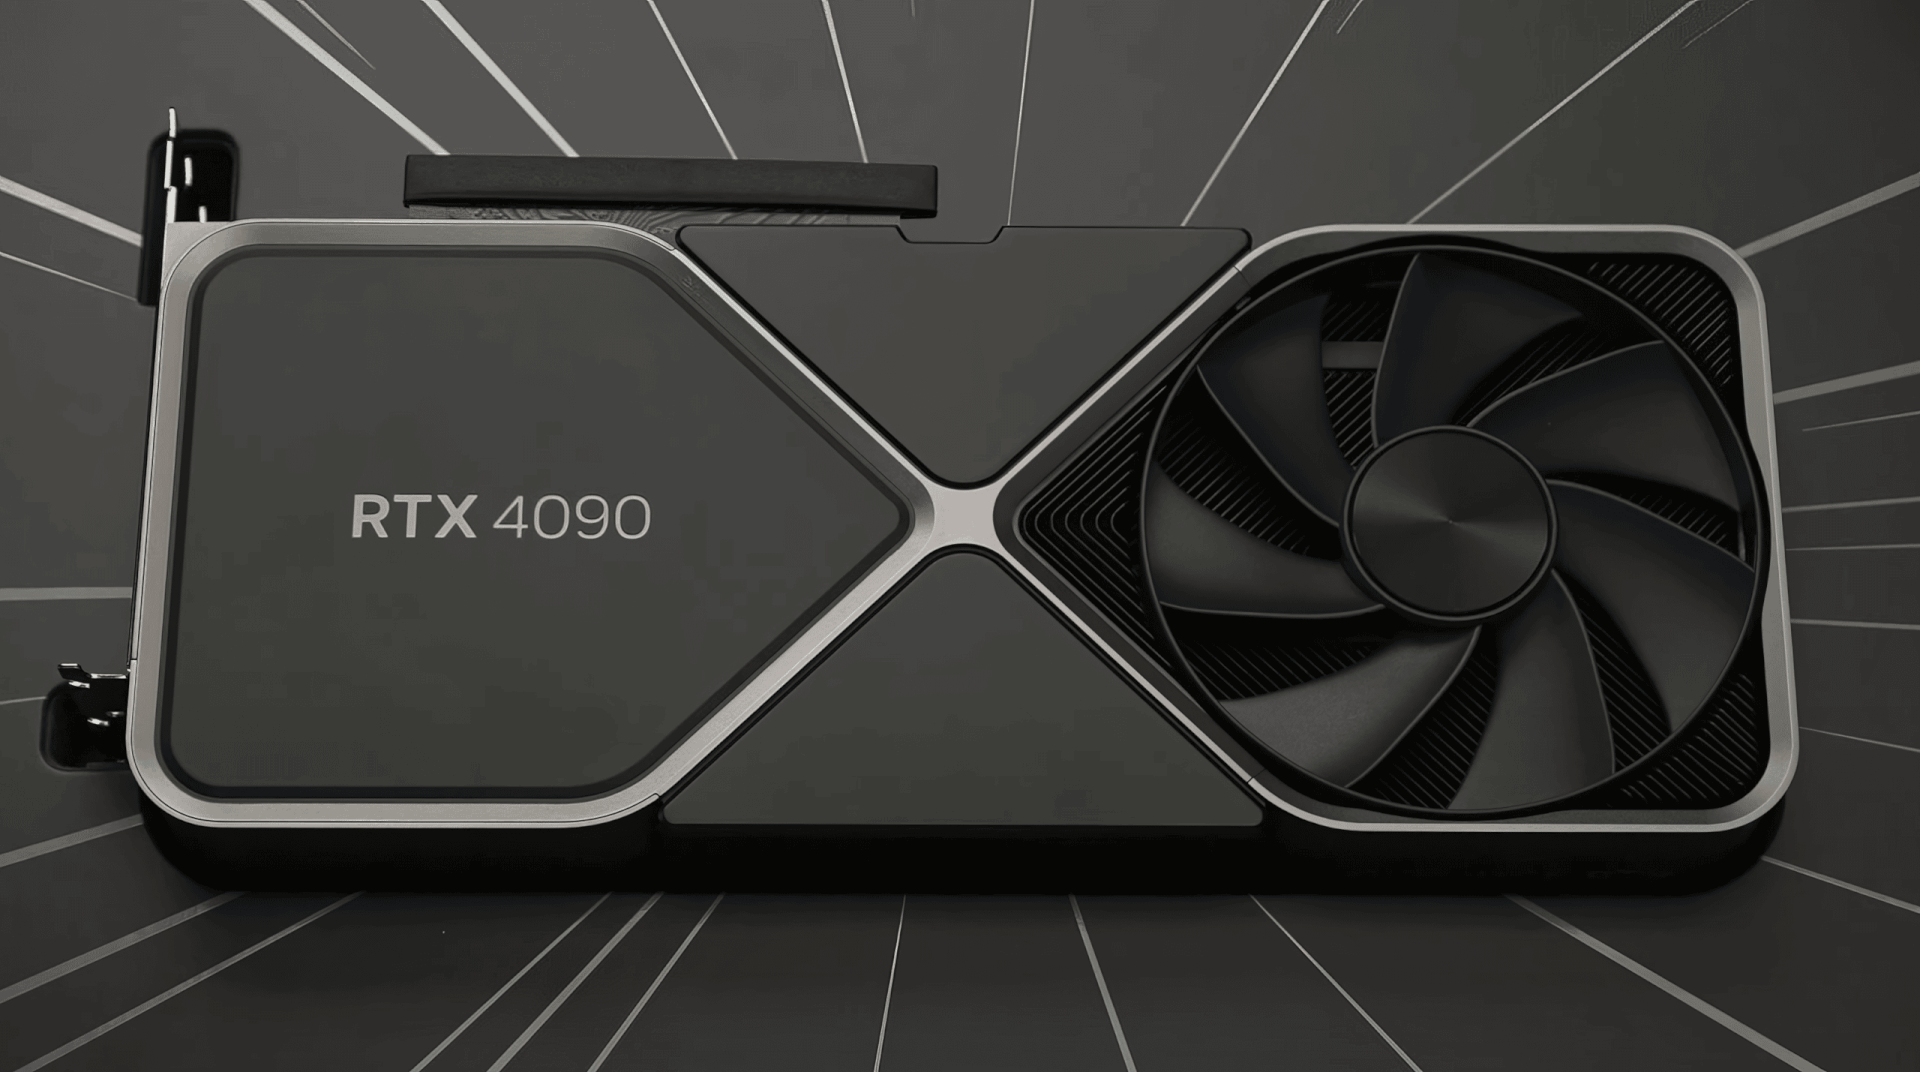 NVIDIA RTX 4090 Draws Over 600W of Power in Certain Benchmarks